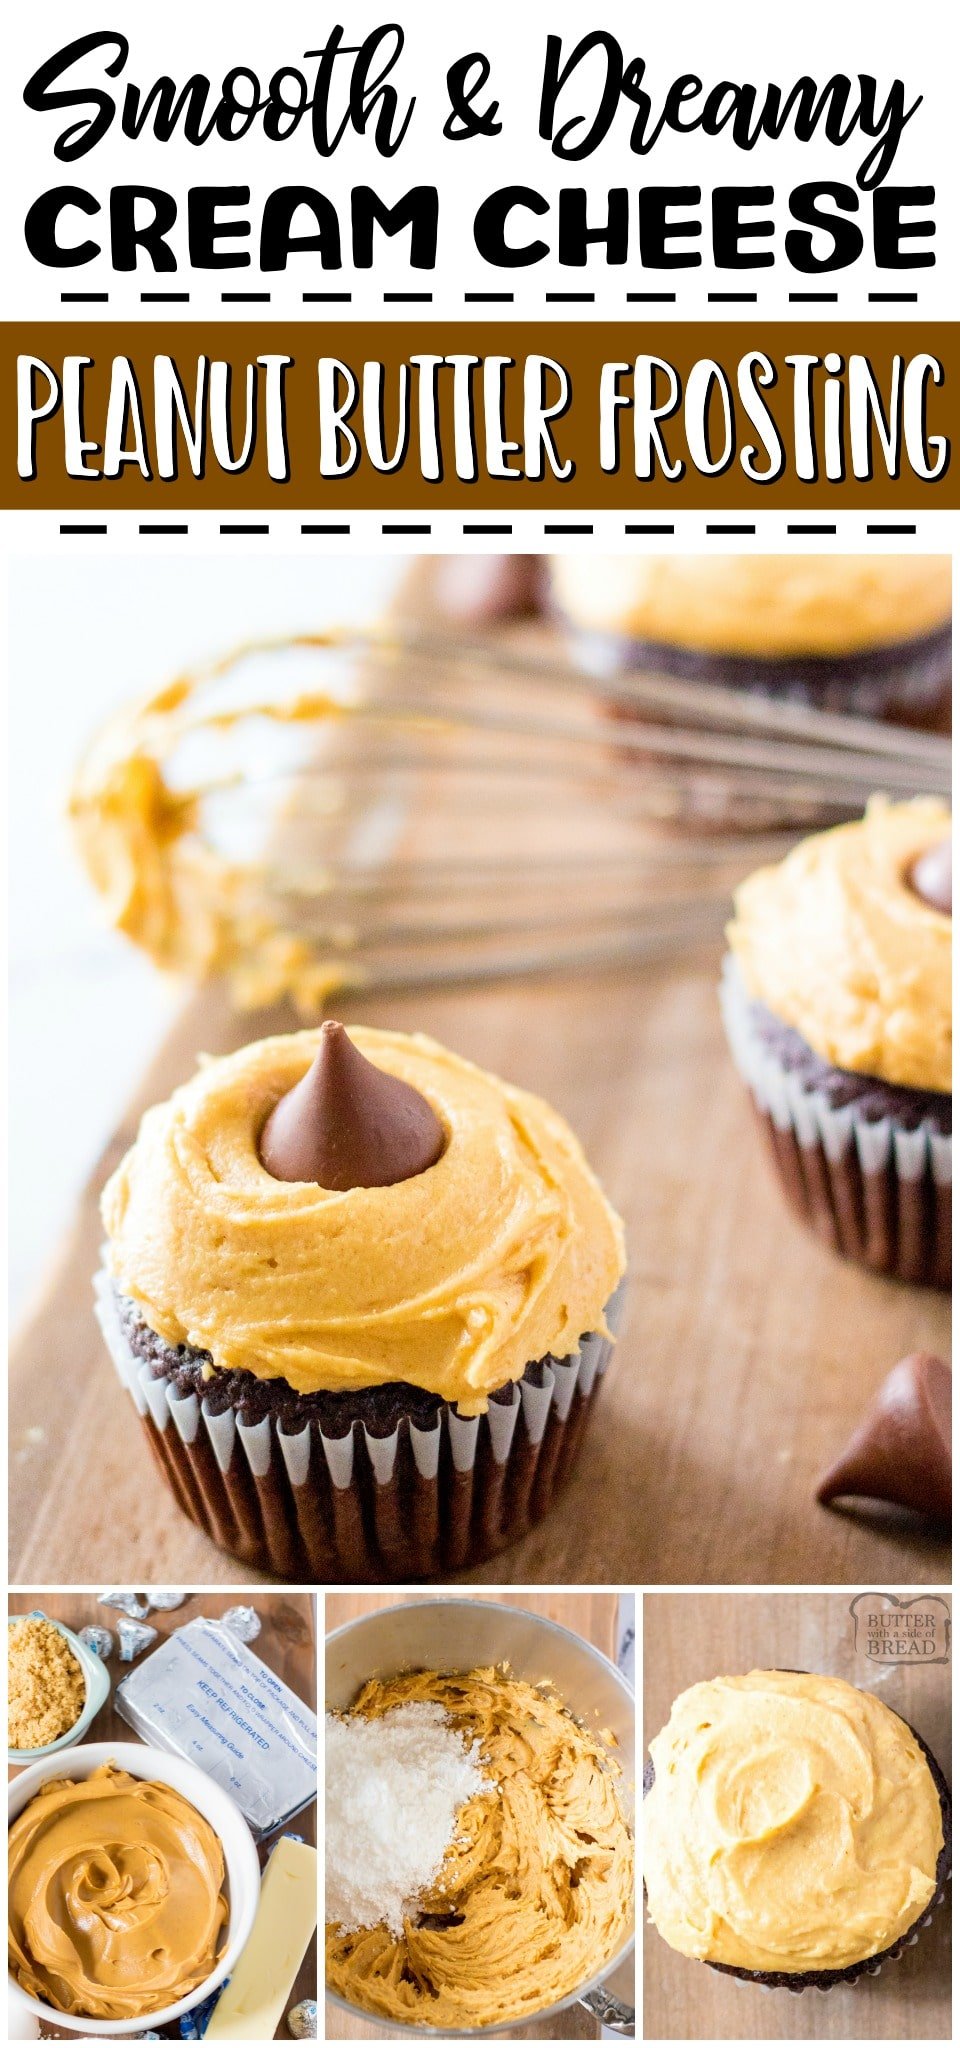 Peanut butter cream cheese frosting is a salty sweet, flavorful frosting recipe that you’re going to love! Cream Cheese & peanut butter combine for a deliciously fluffy, smooth peanut butter frosting that is perfect on cupcakes, cakes, cookies & more! #peanutbutter #frosting #creamcheese #dessert #buttercream #easyrecipe from BUTTER WITH A SIDE OF BREAD